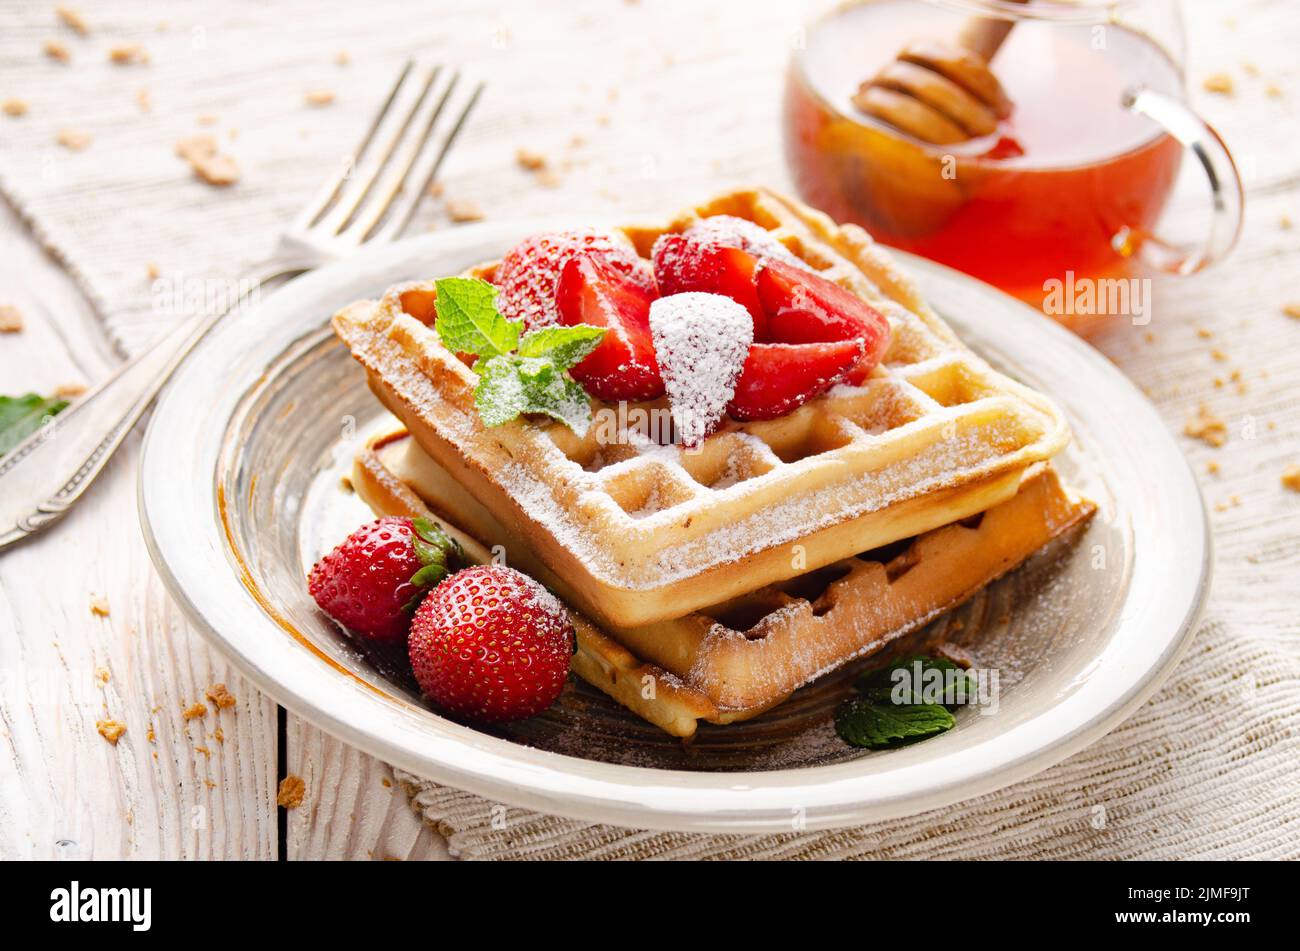 Belgian waffles served with strawberries and mint leaf dusted with powdered sugar on white wooden kitchen table with syrup aside Stock Photo